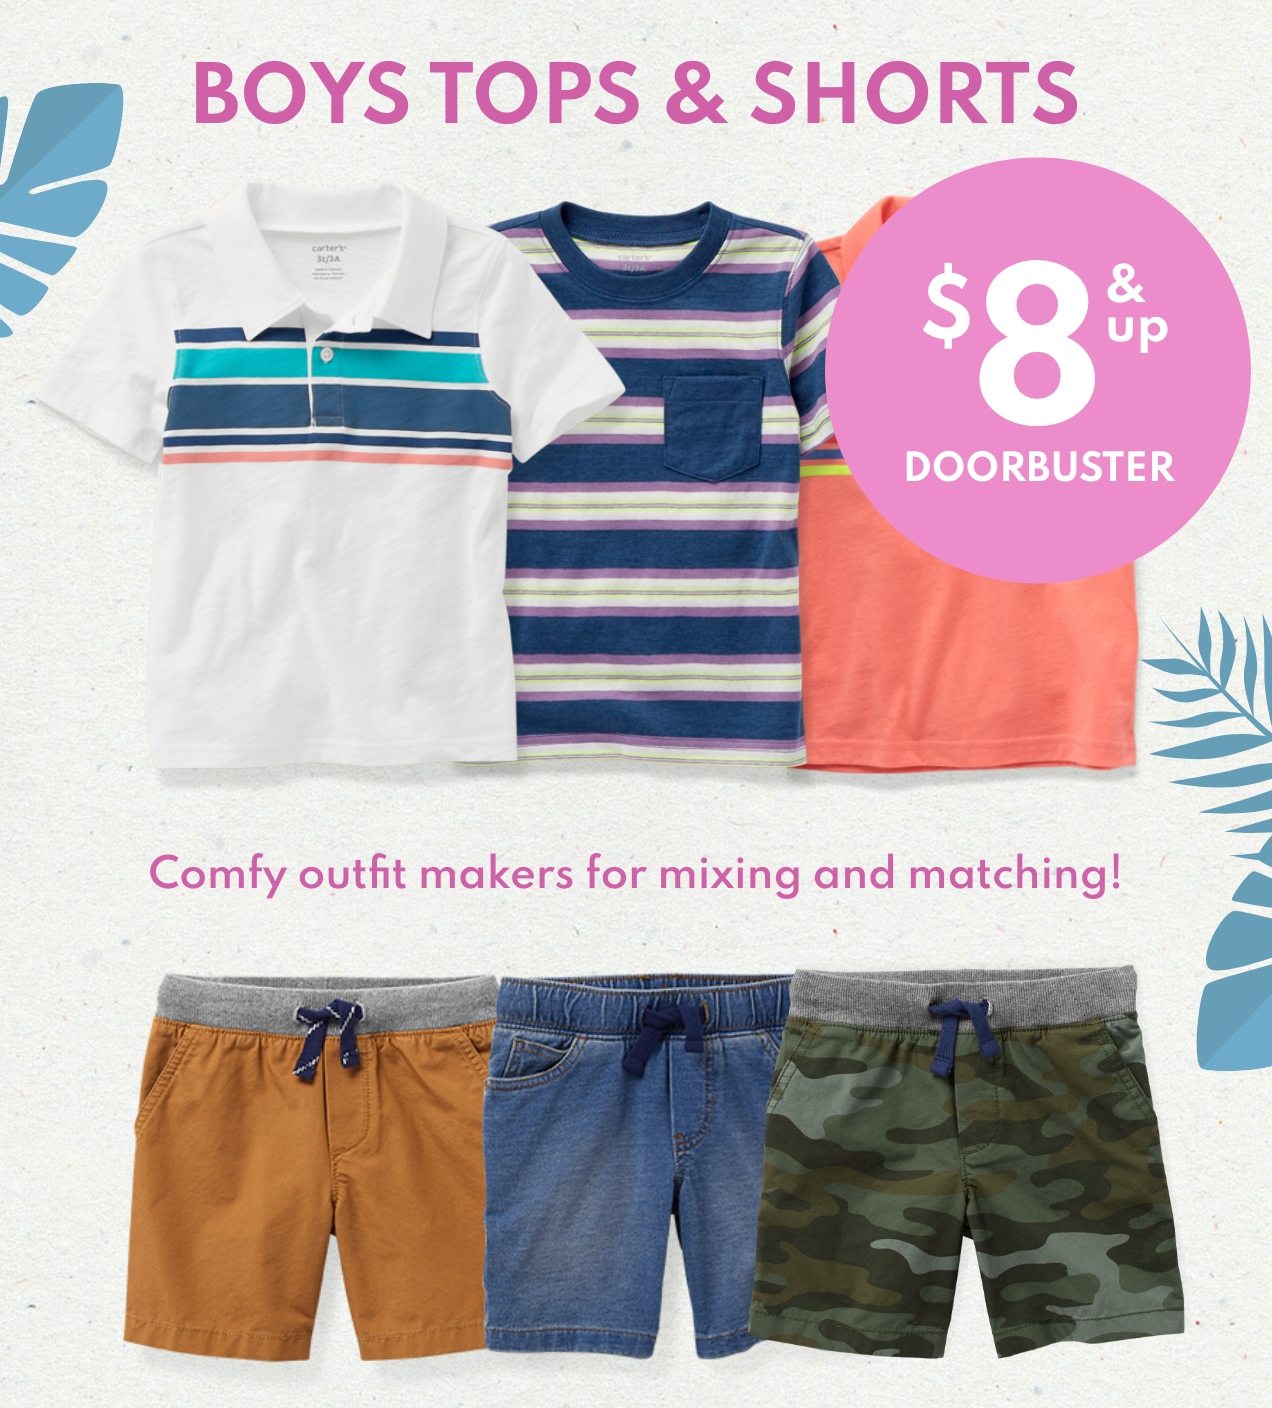 BOYS TOPS & SHORTS | $8 & up | DOORBUSTER | Comfy outfit makers for mixing and matching!